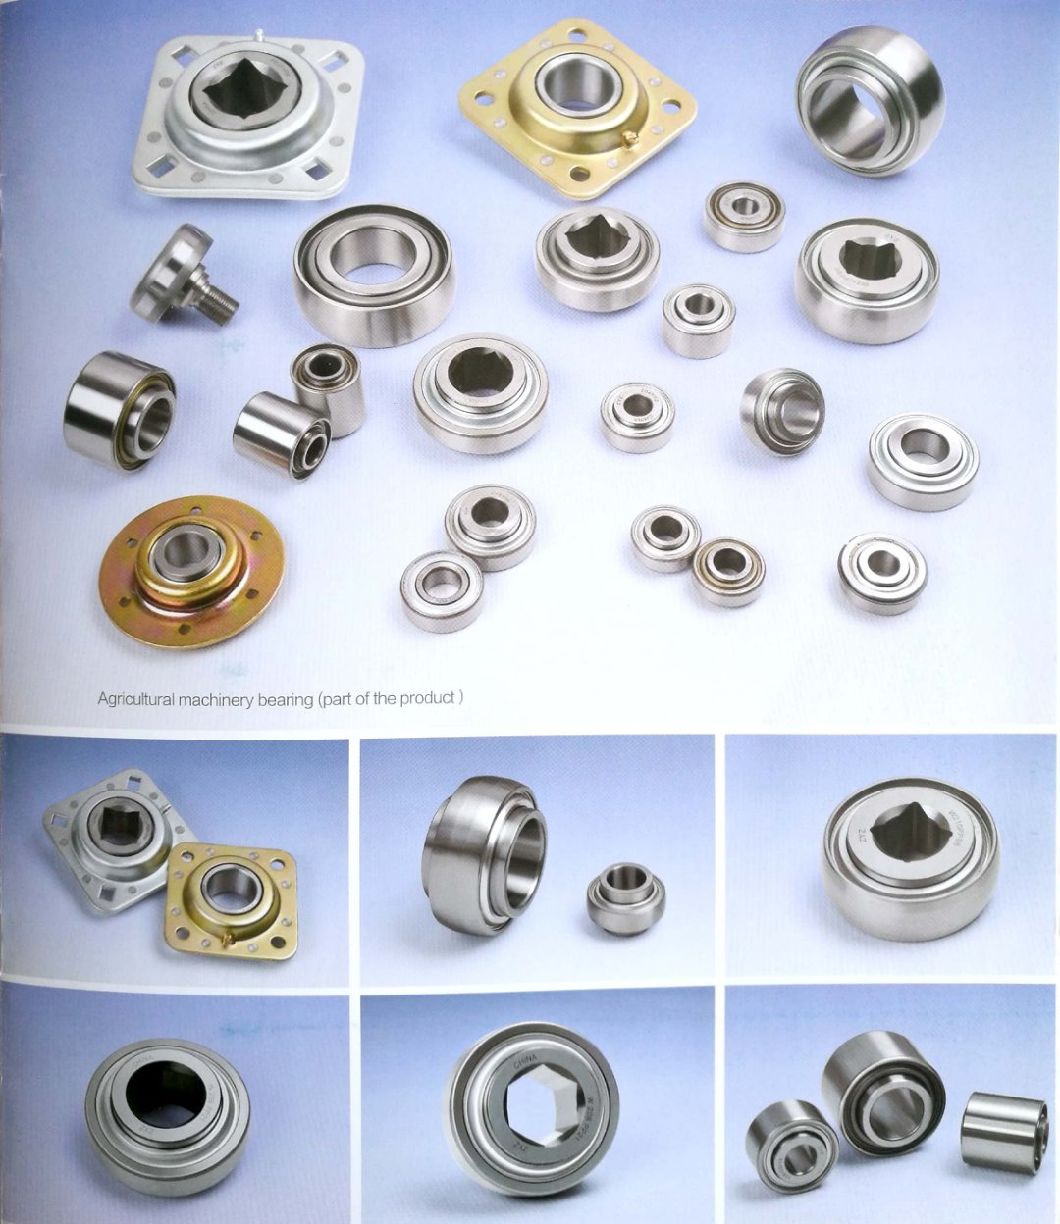 St491b High Quality Round Bore Farm Machinery Bearing Housing Relubricable Heavy Duty Agricultural Machinery Parts